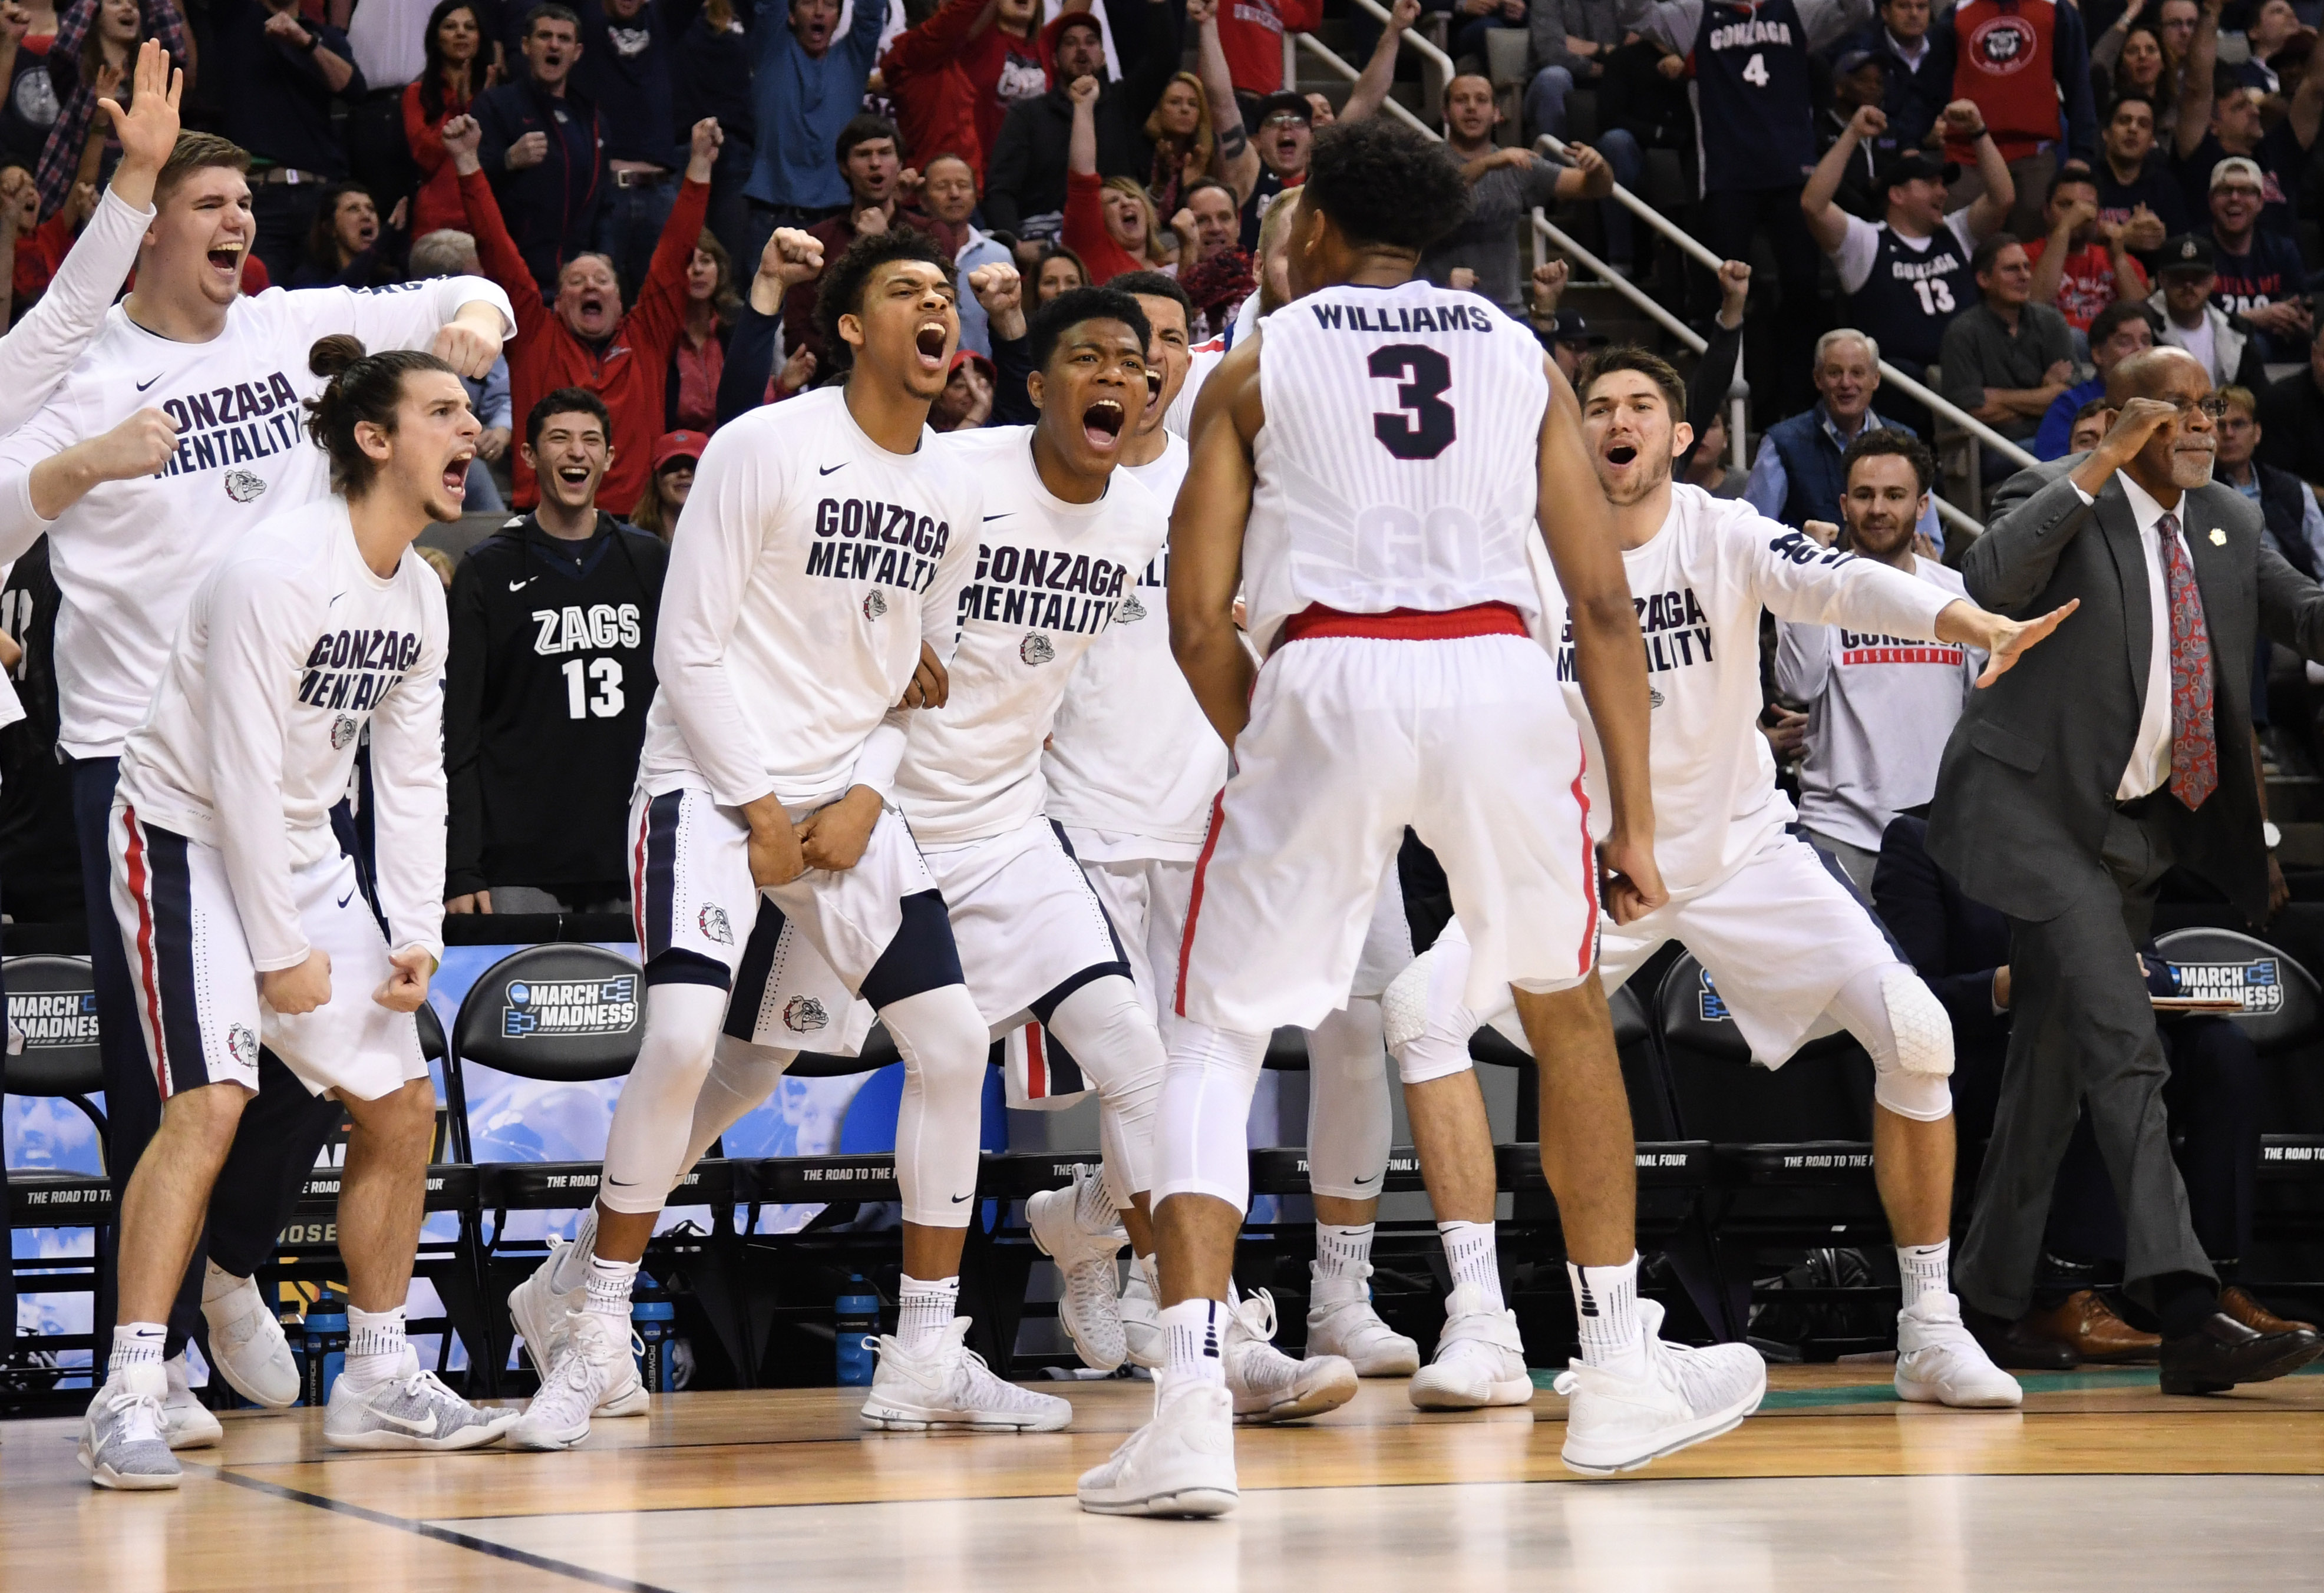 Updated 2017 March Madness bracket: Gonzaga advances to Final Four